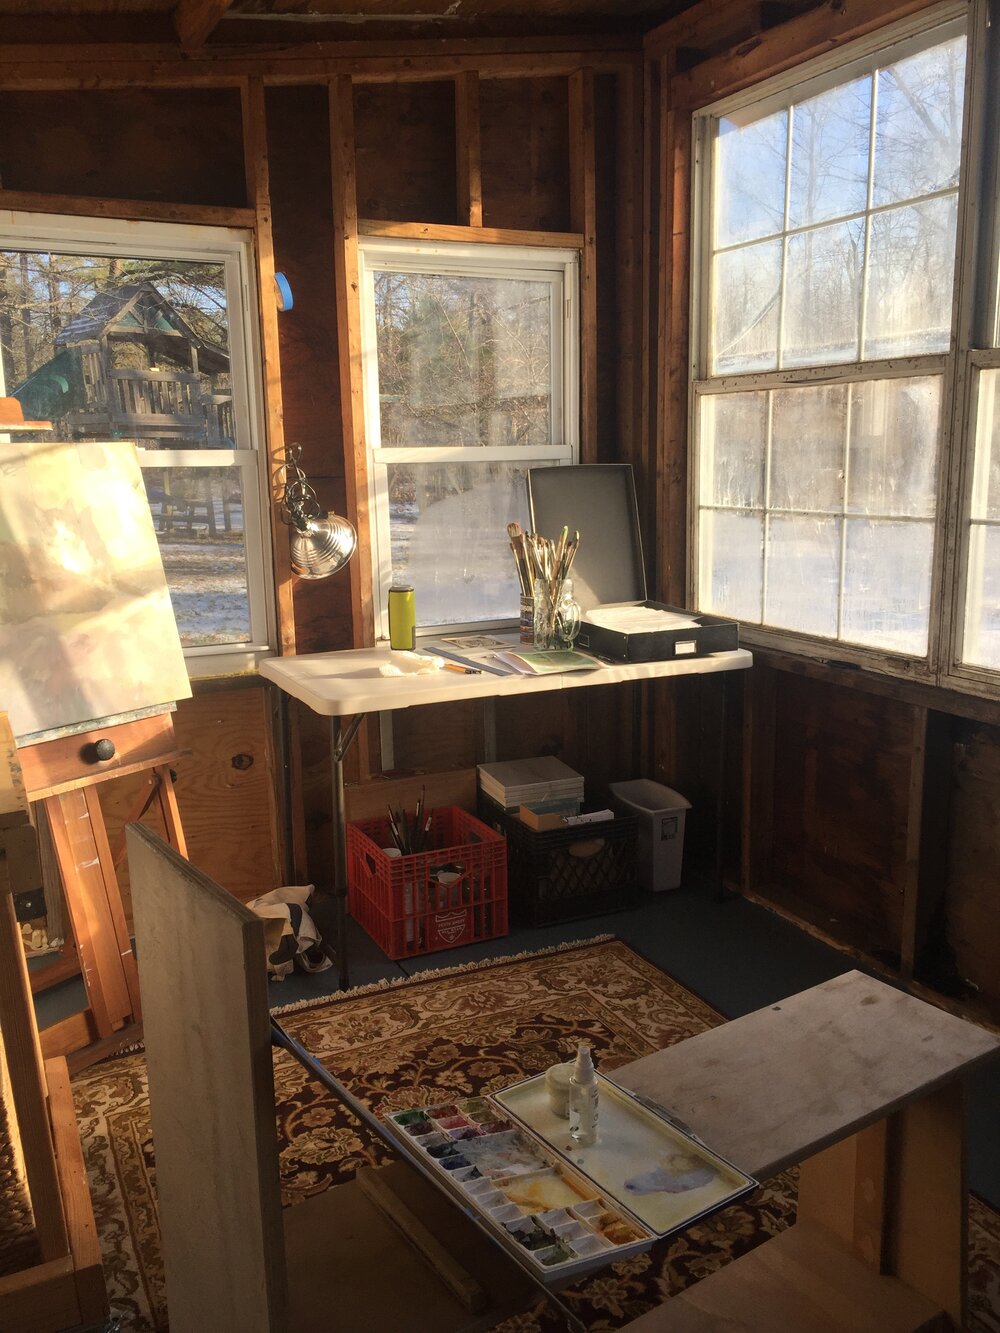 A backyard art studio, from an old shed makeover